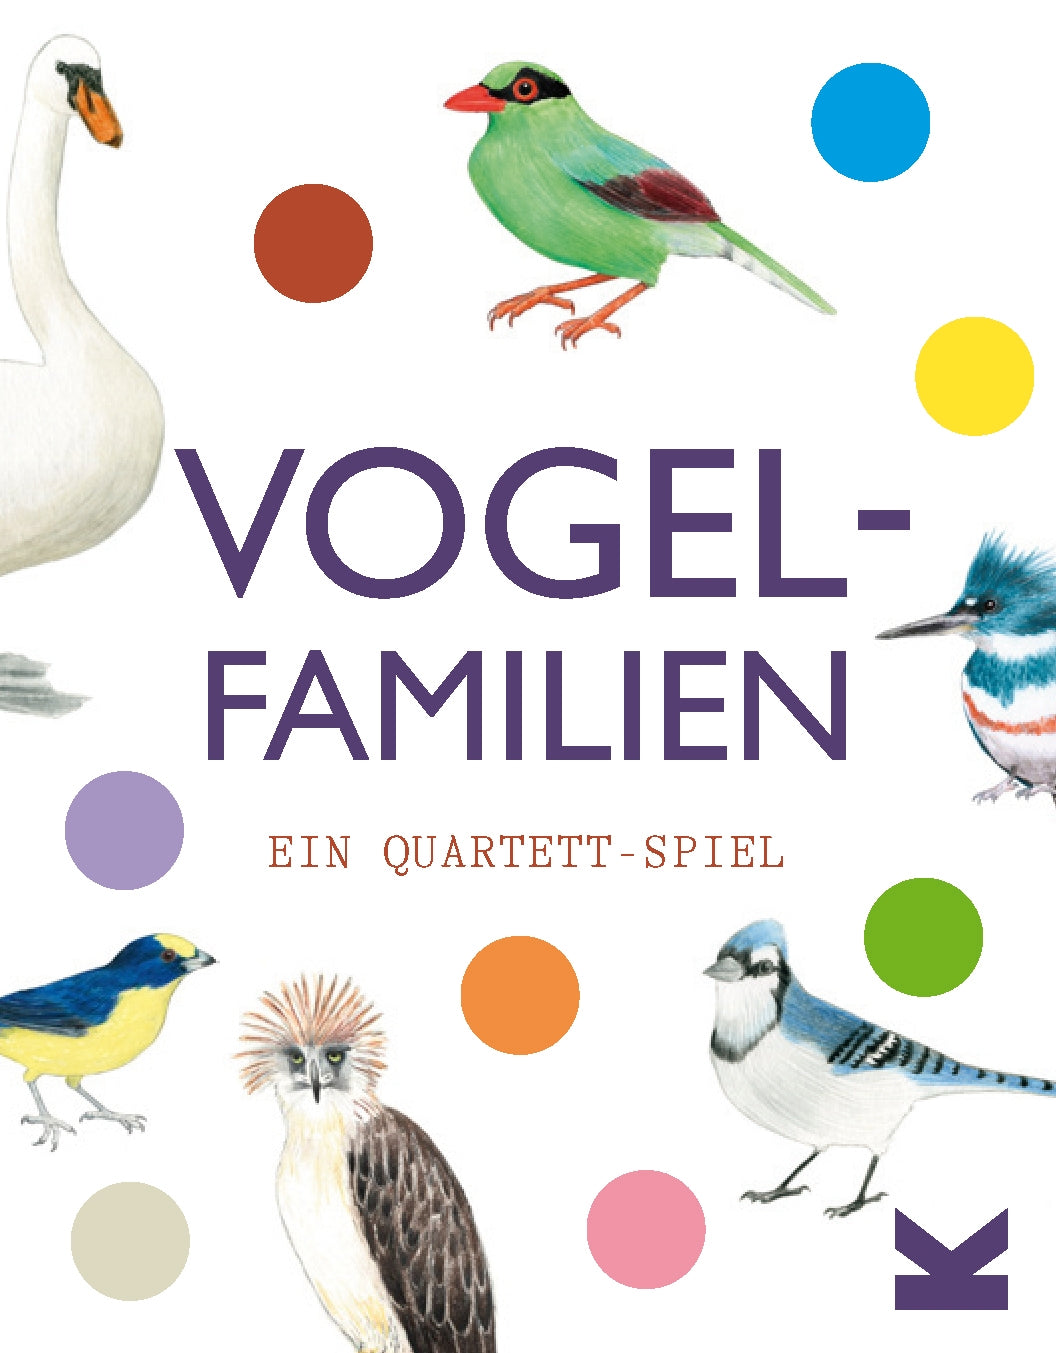 Vogel-Familien by Mike Unwin, Christine Berrie, Sarah Pasquay